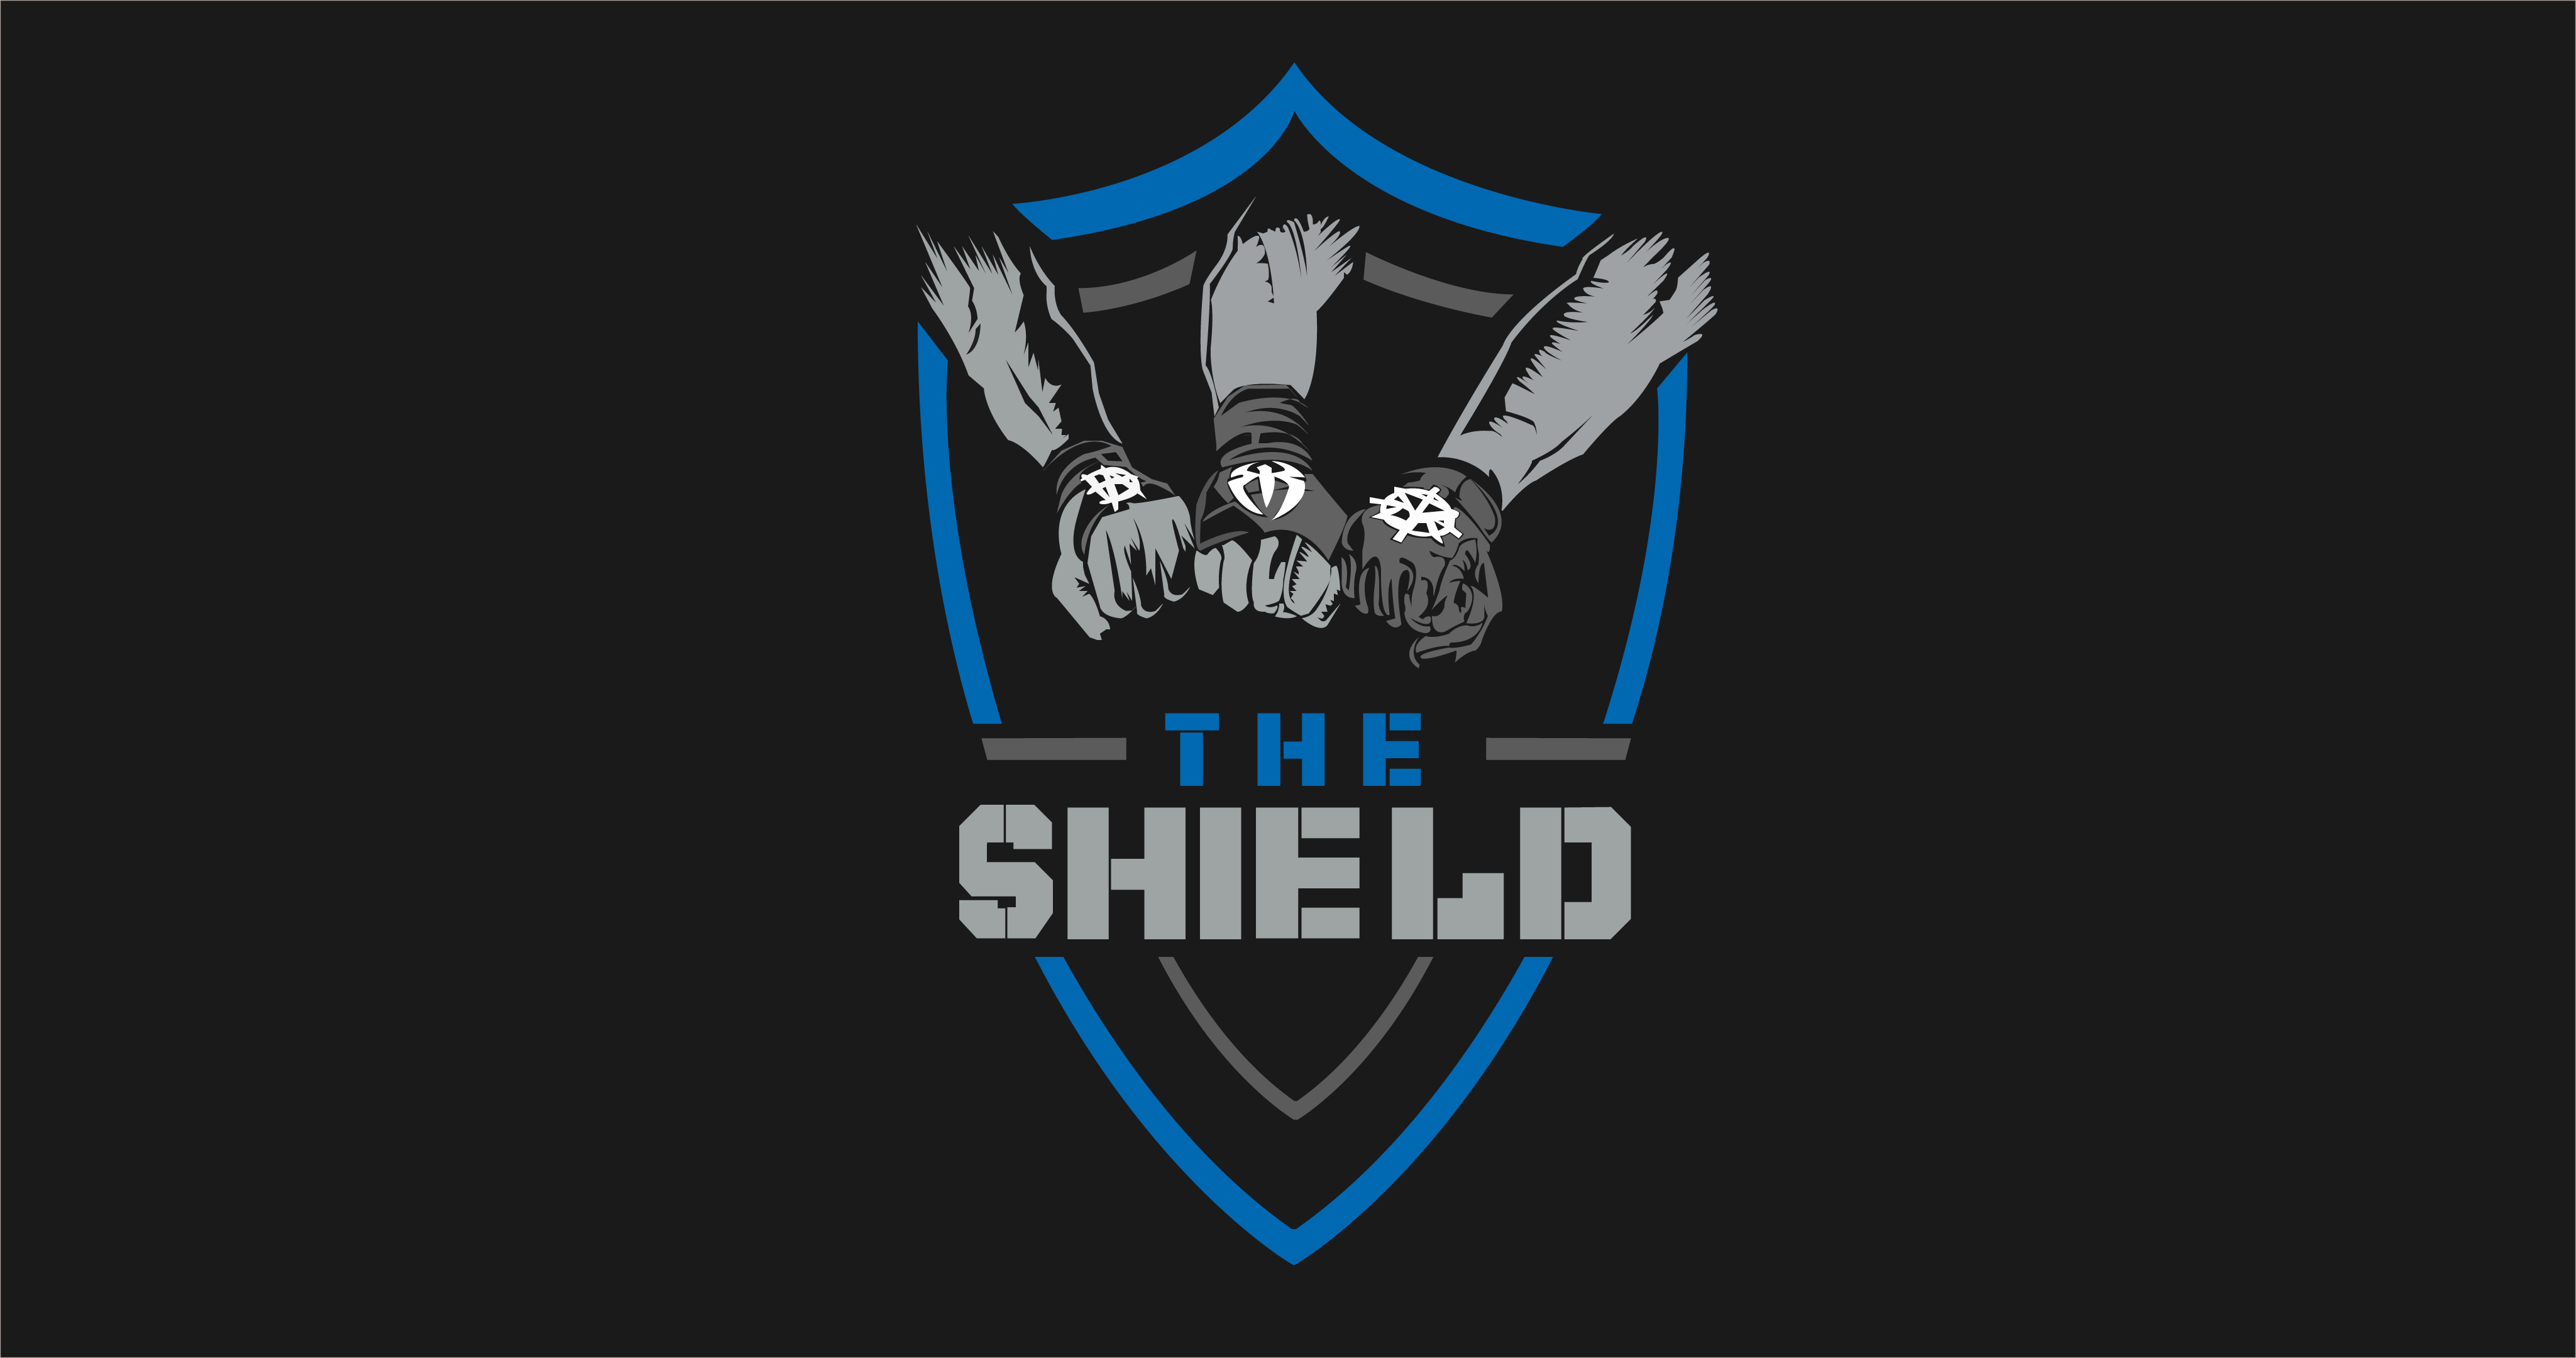 The Shield Logo Wallpapers - Wallpaper Cave.